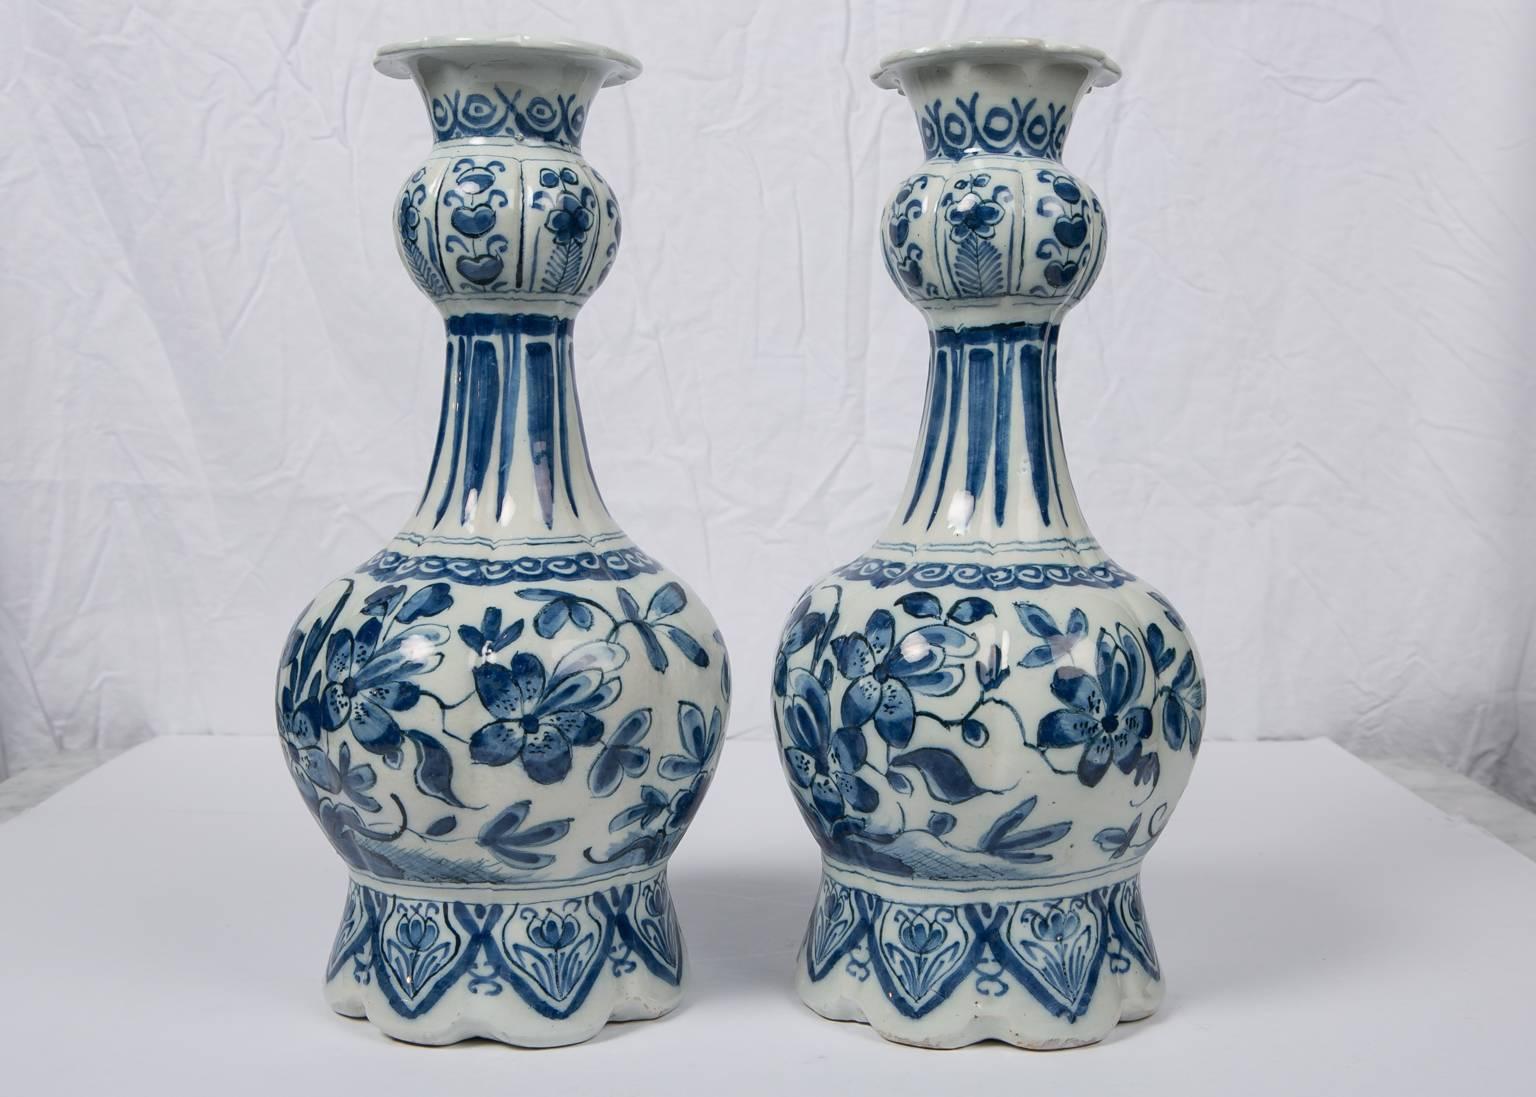 Pair Blue and White Dutch Delft vases painted in deep cobalt blue, each vase is beautifully decorated with a continuous scene showing showing peacocks in a flower filled garden. The necks are painted with exotic banana leaves. The lobed octagonal